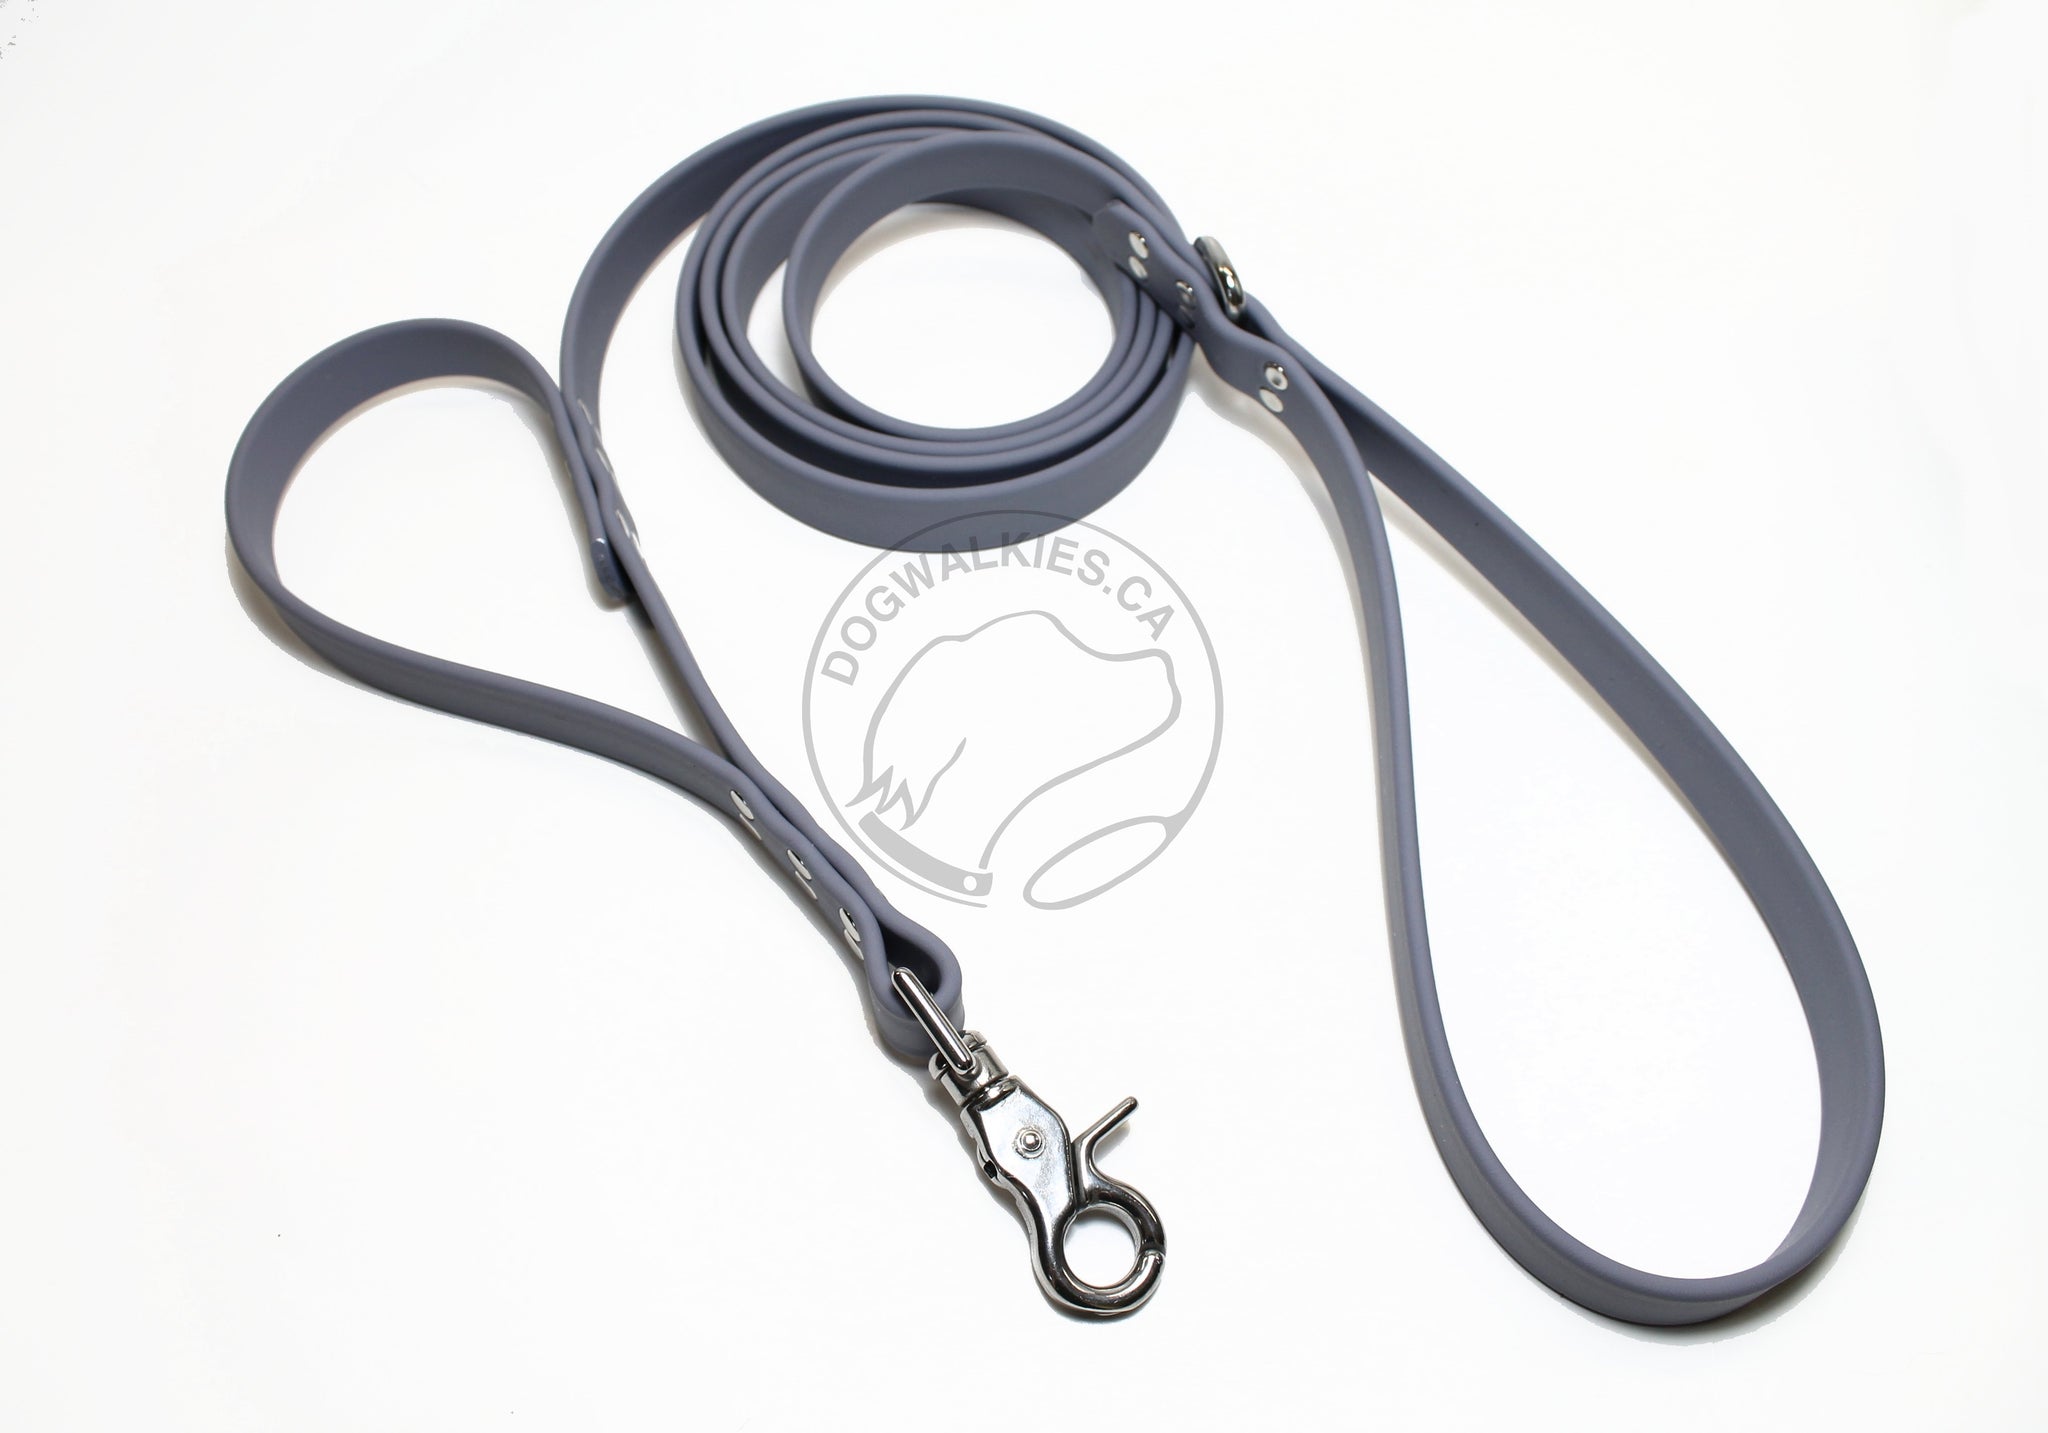 Two Handle Biothane Large 3/4"(20mm) wide Dog Leash - Leash with Traffic Handle - 35 Colours